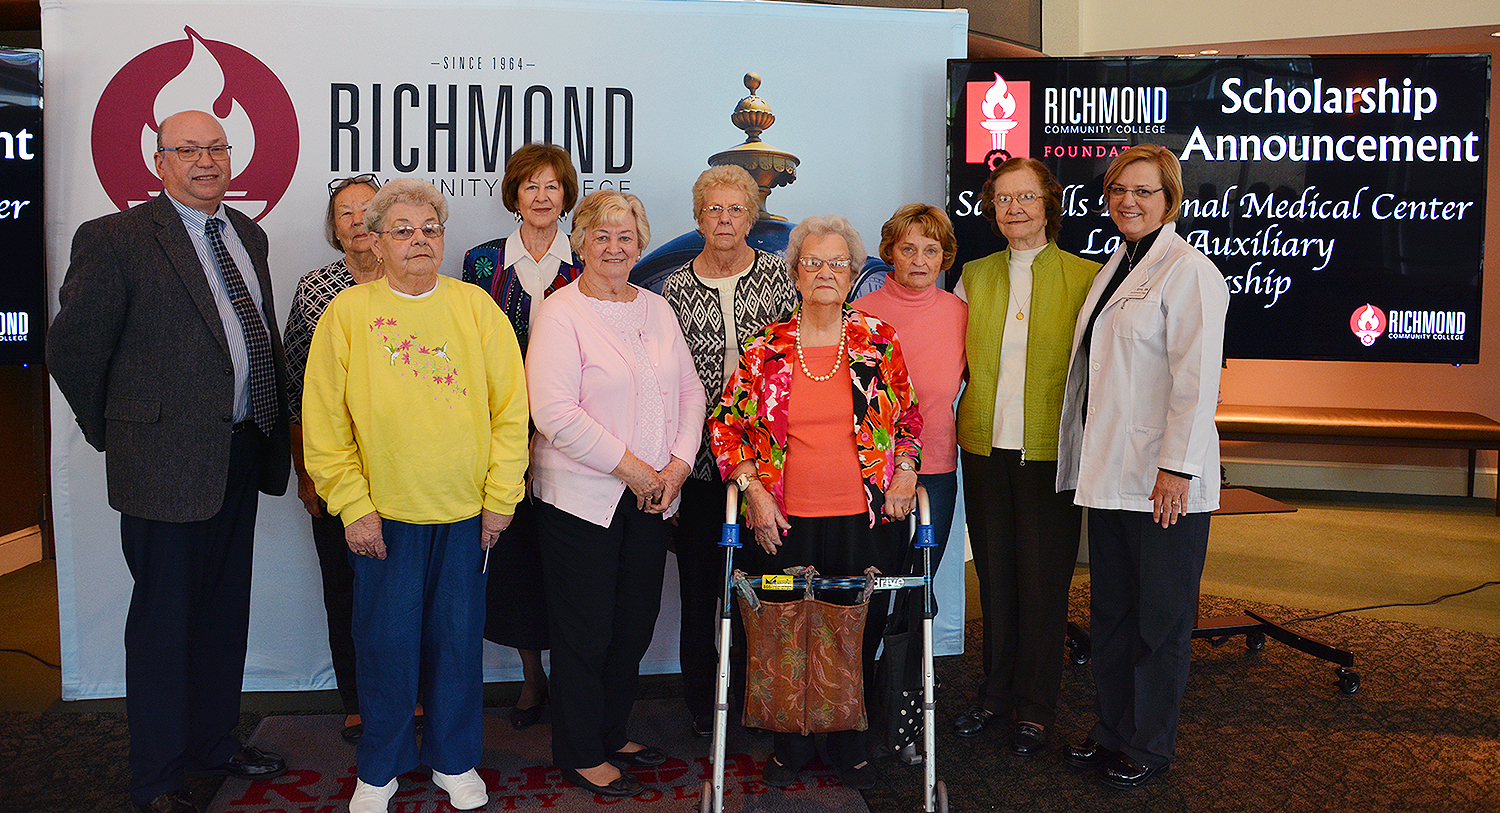 The Ladies Auxiliary group stands with Dr. McInnis and Janet Sims.